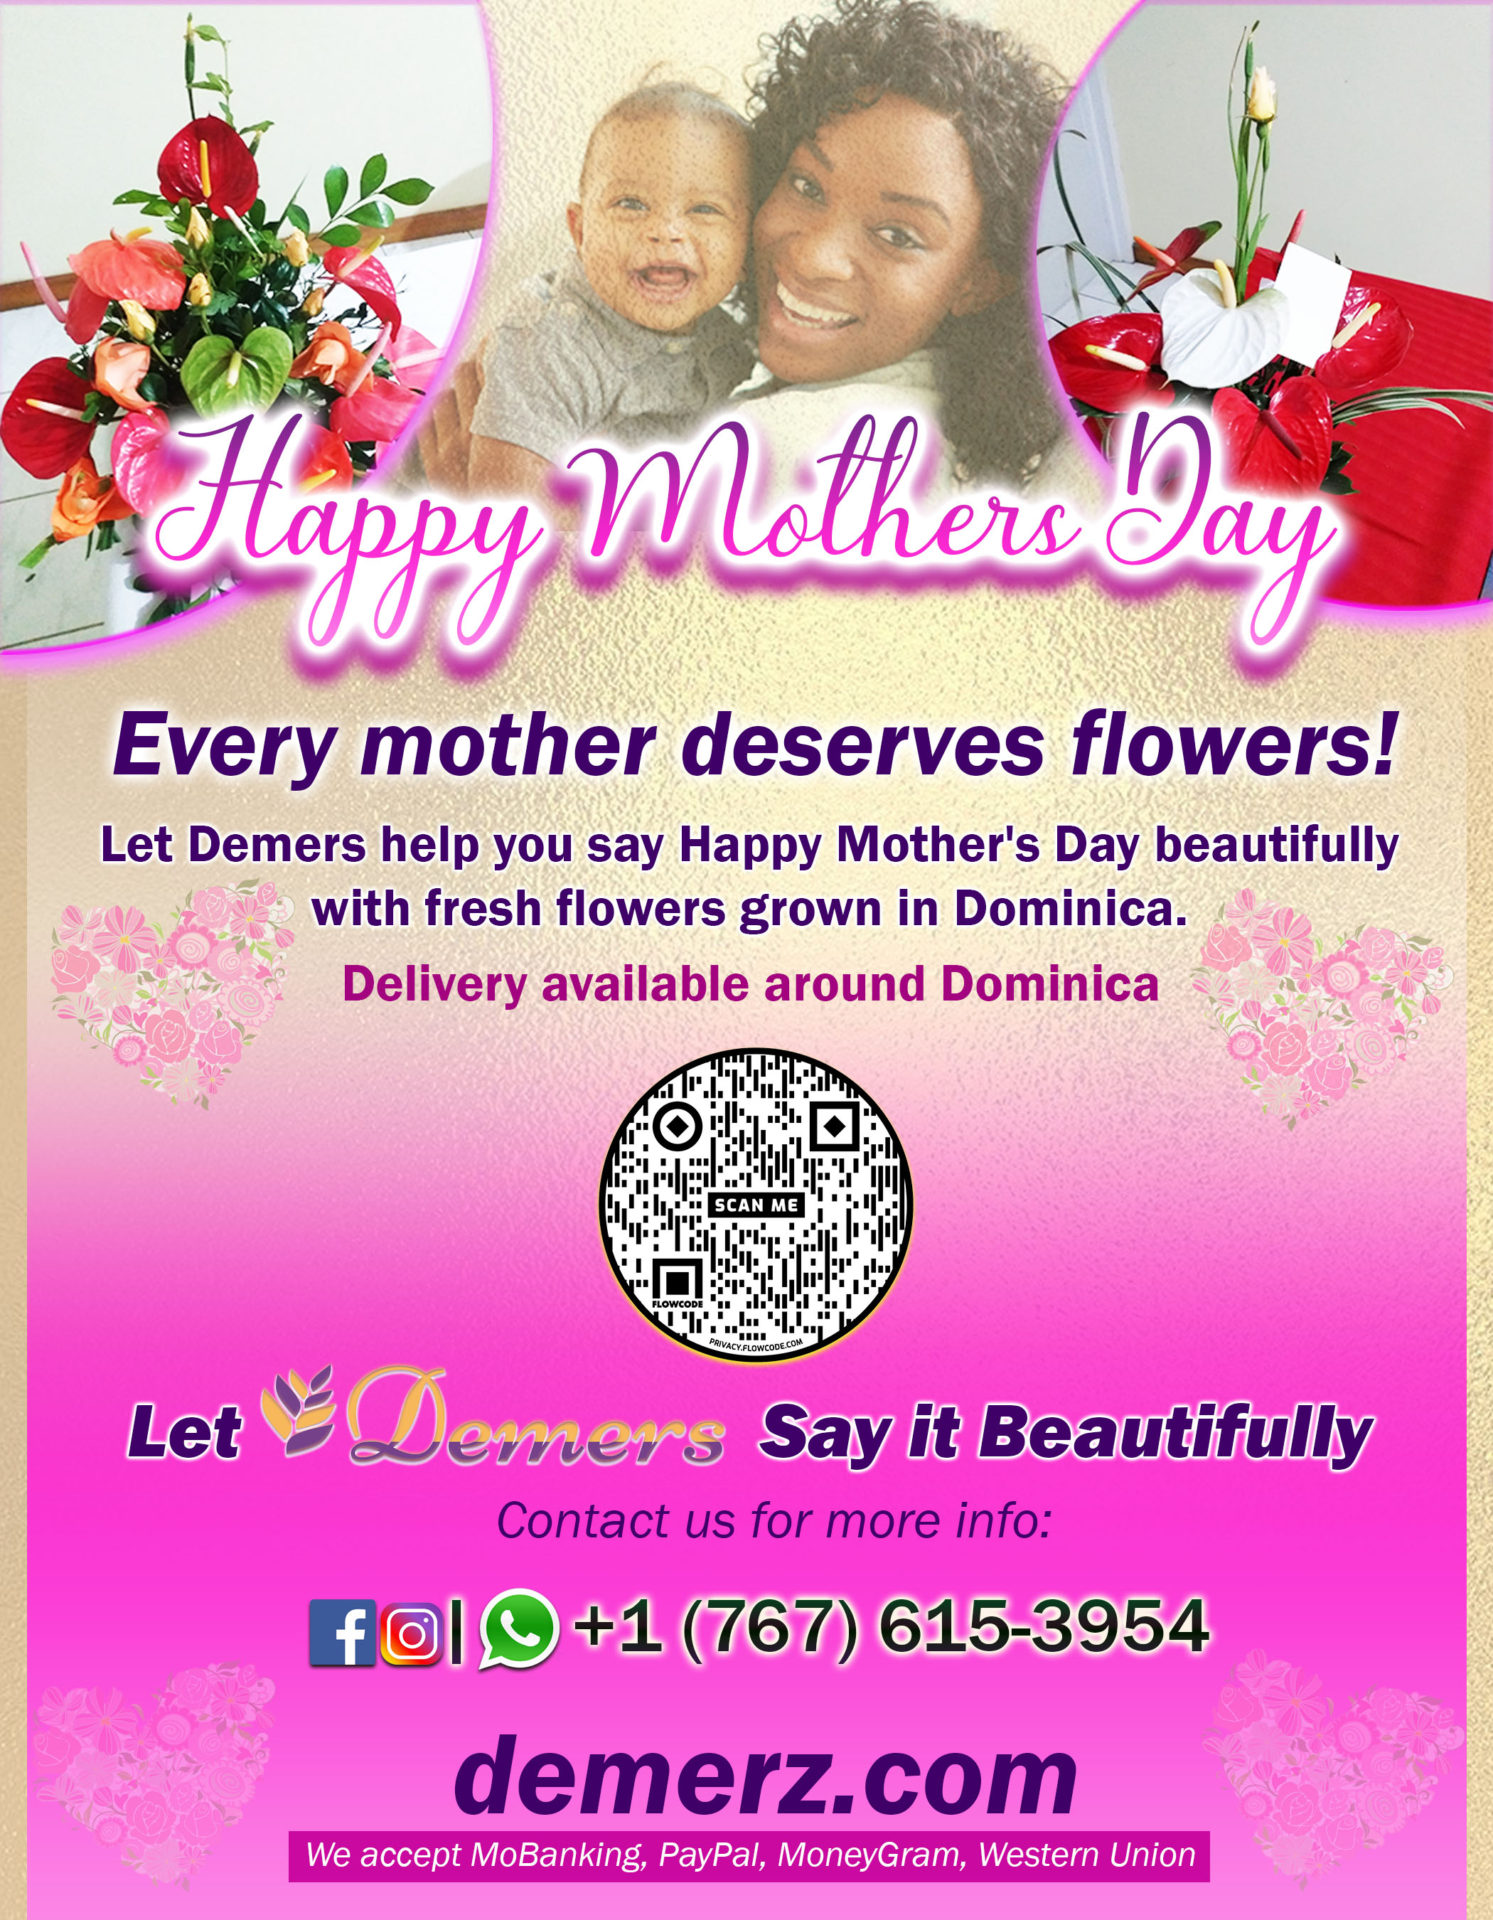 Demers Flowers is accepting orders for Mother’s Day